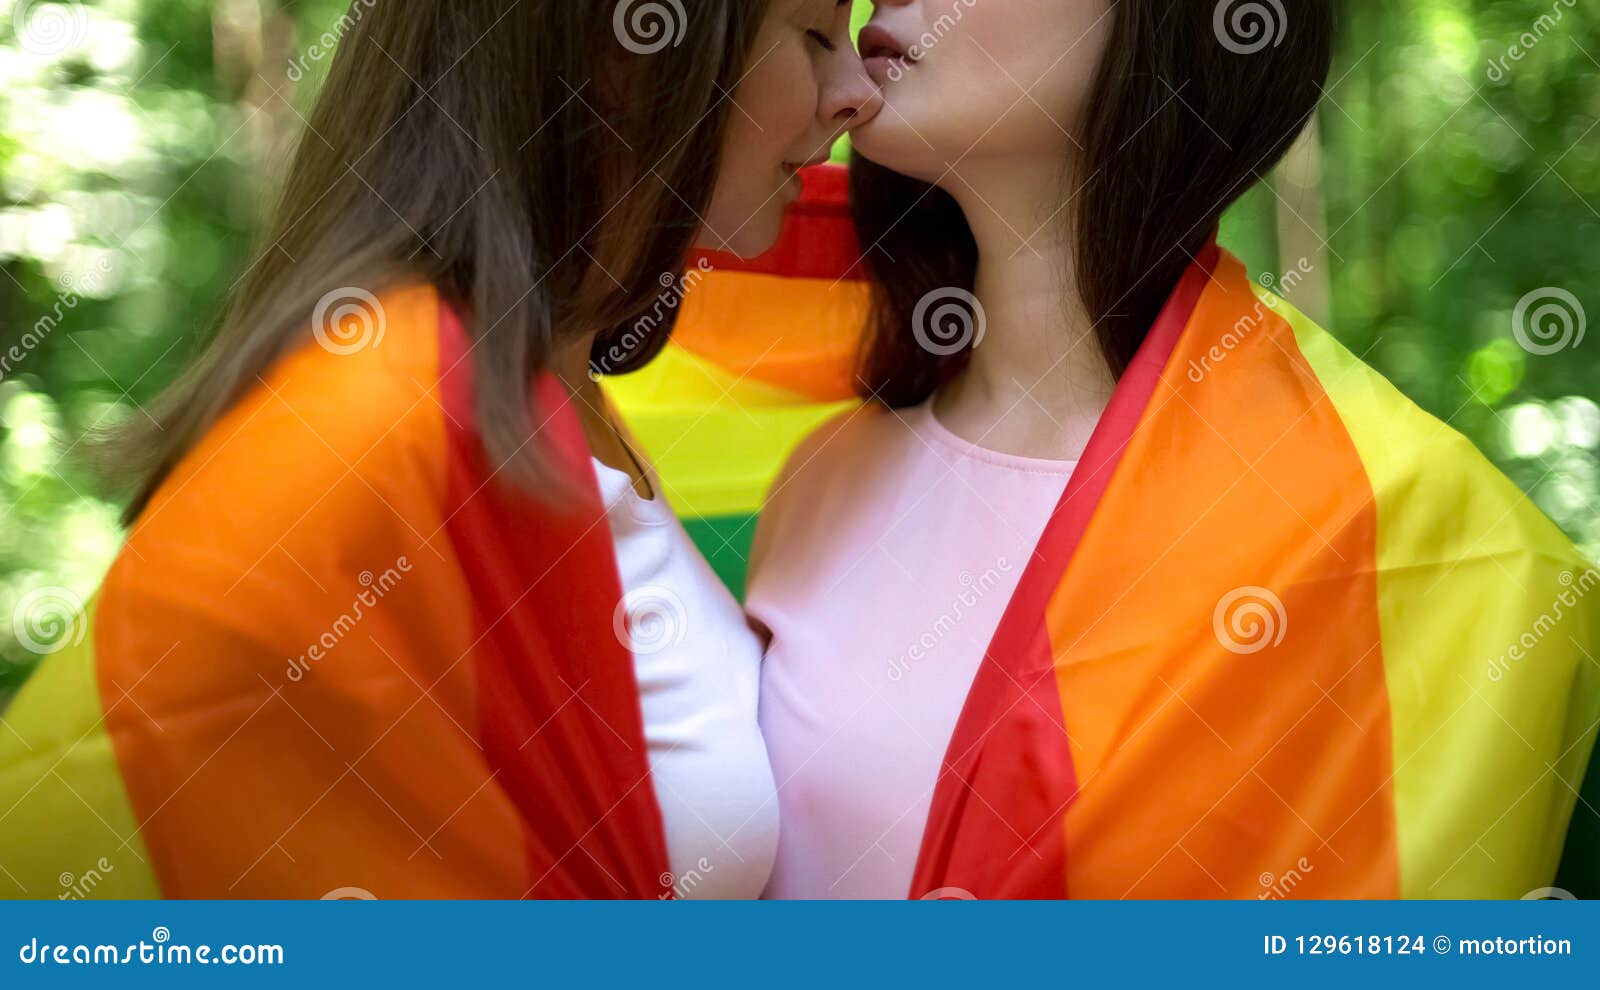 Lesbian chicks make out in public